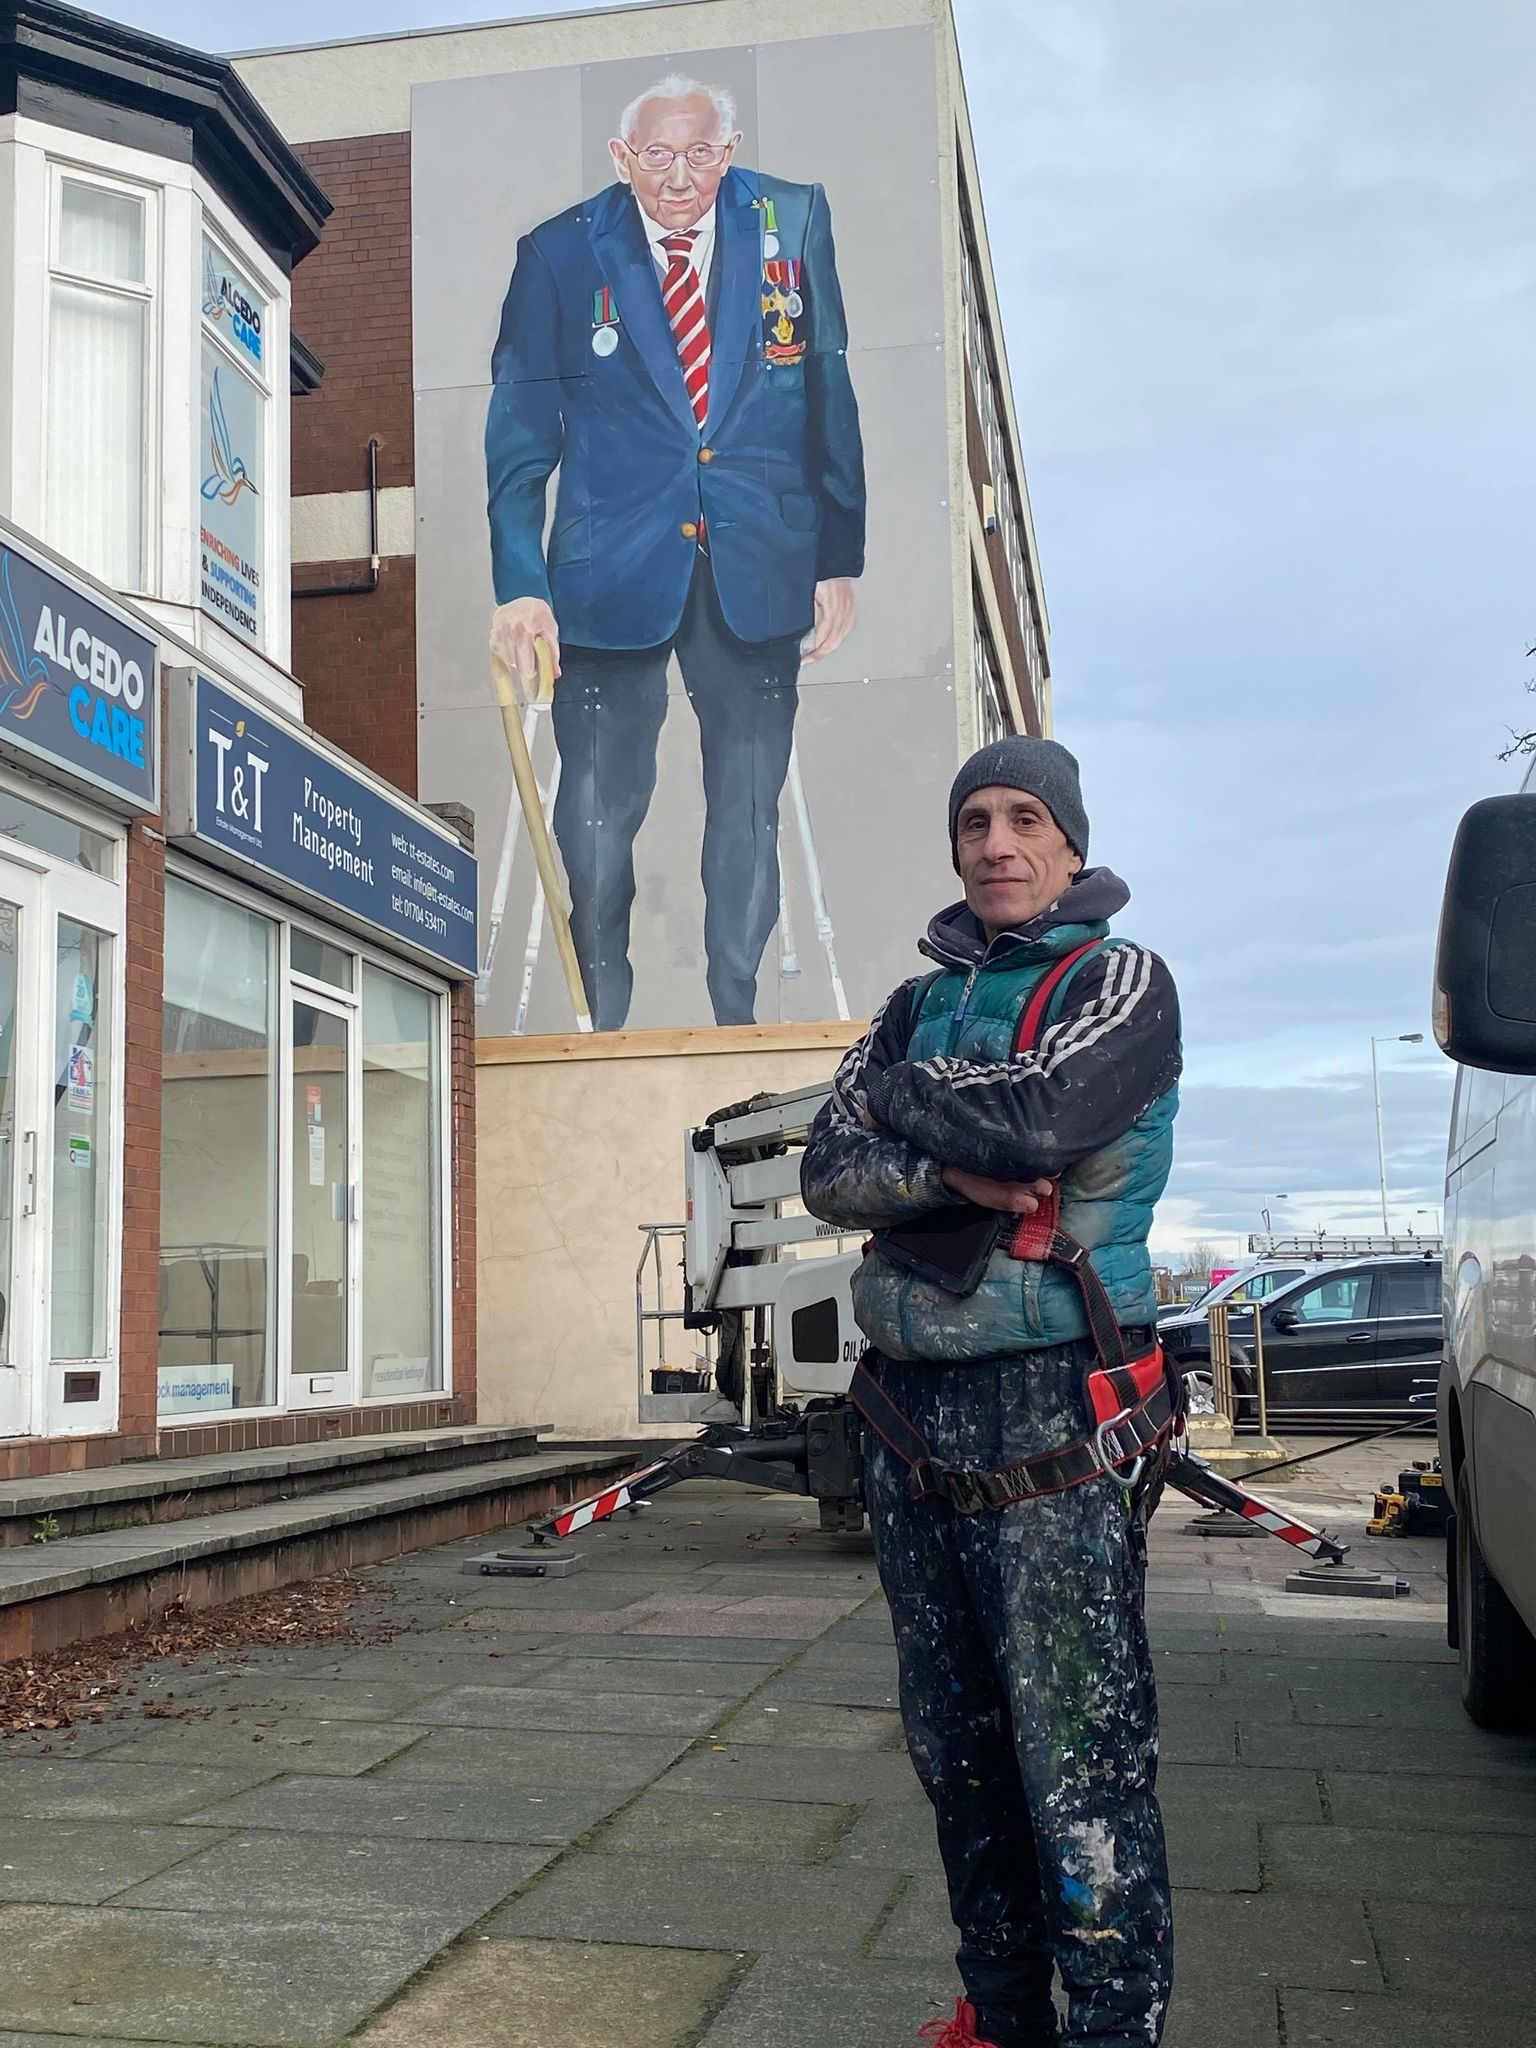 The UK's biggest mural of Captain Sir Tom Moore now stands proudly outside the Anthony James Estate Agents office on Hoghton Street in Southport. It was painted by local artist Robert Newbiggin